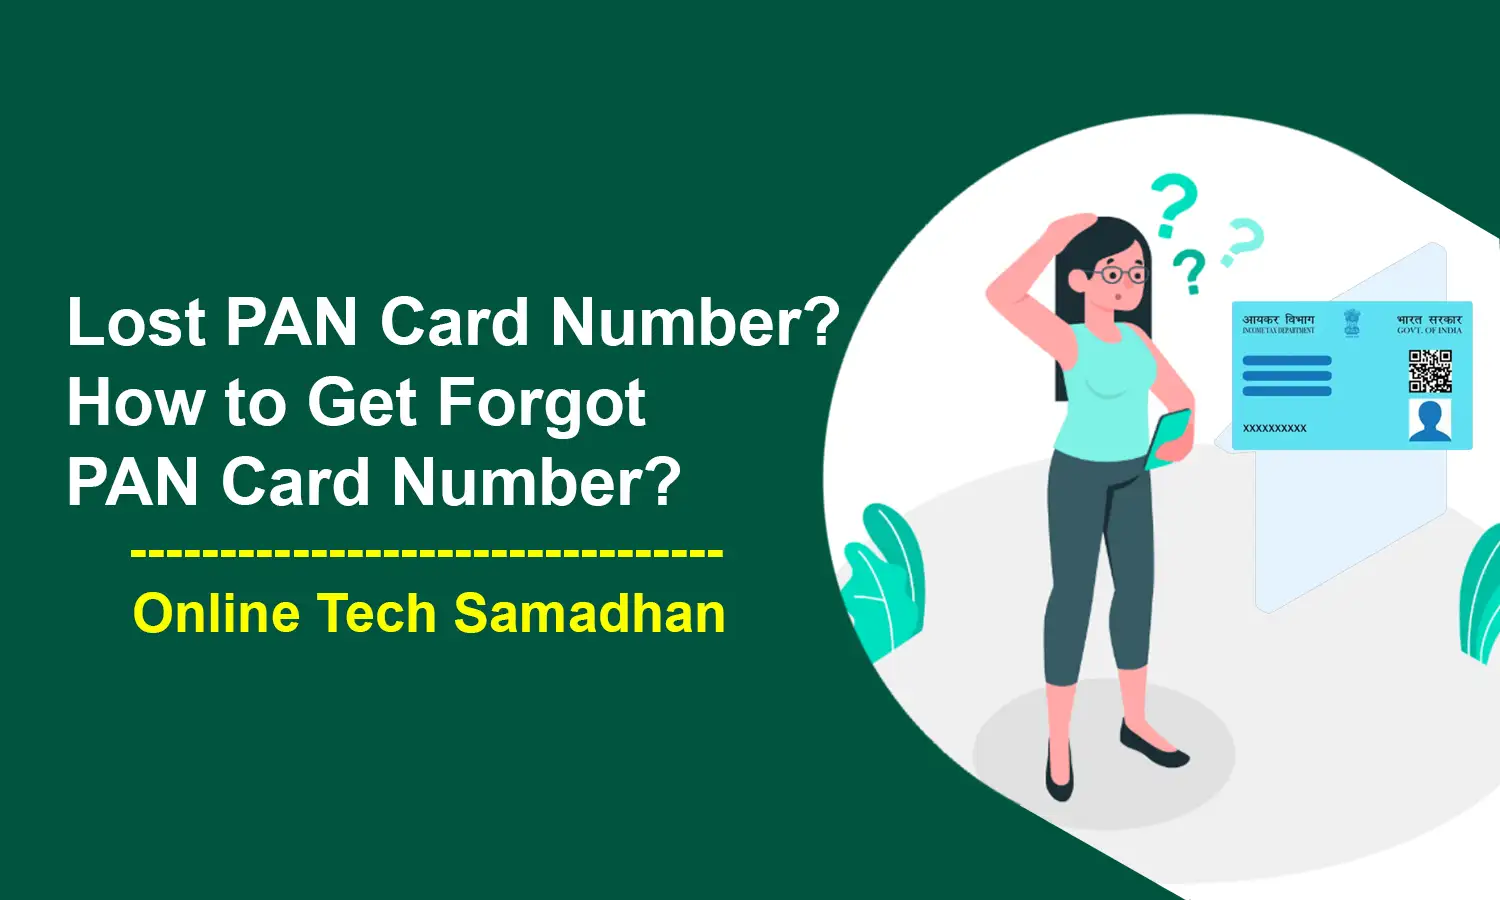 Lost PAN Card Number? How to Get Forgot PAN Card Number?